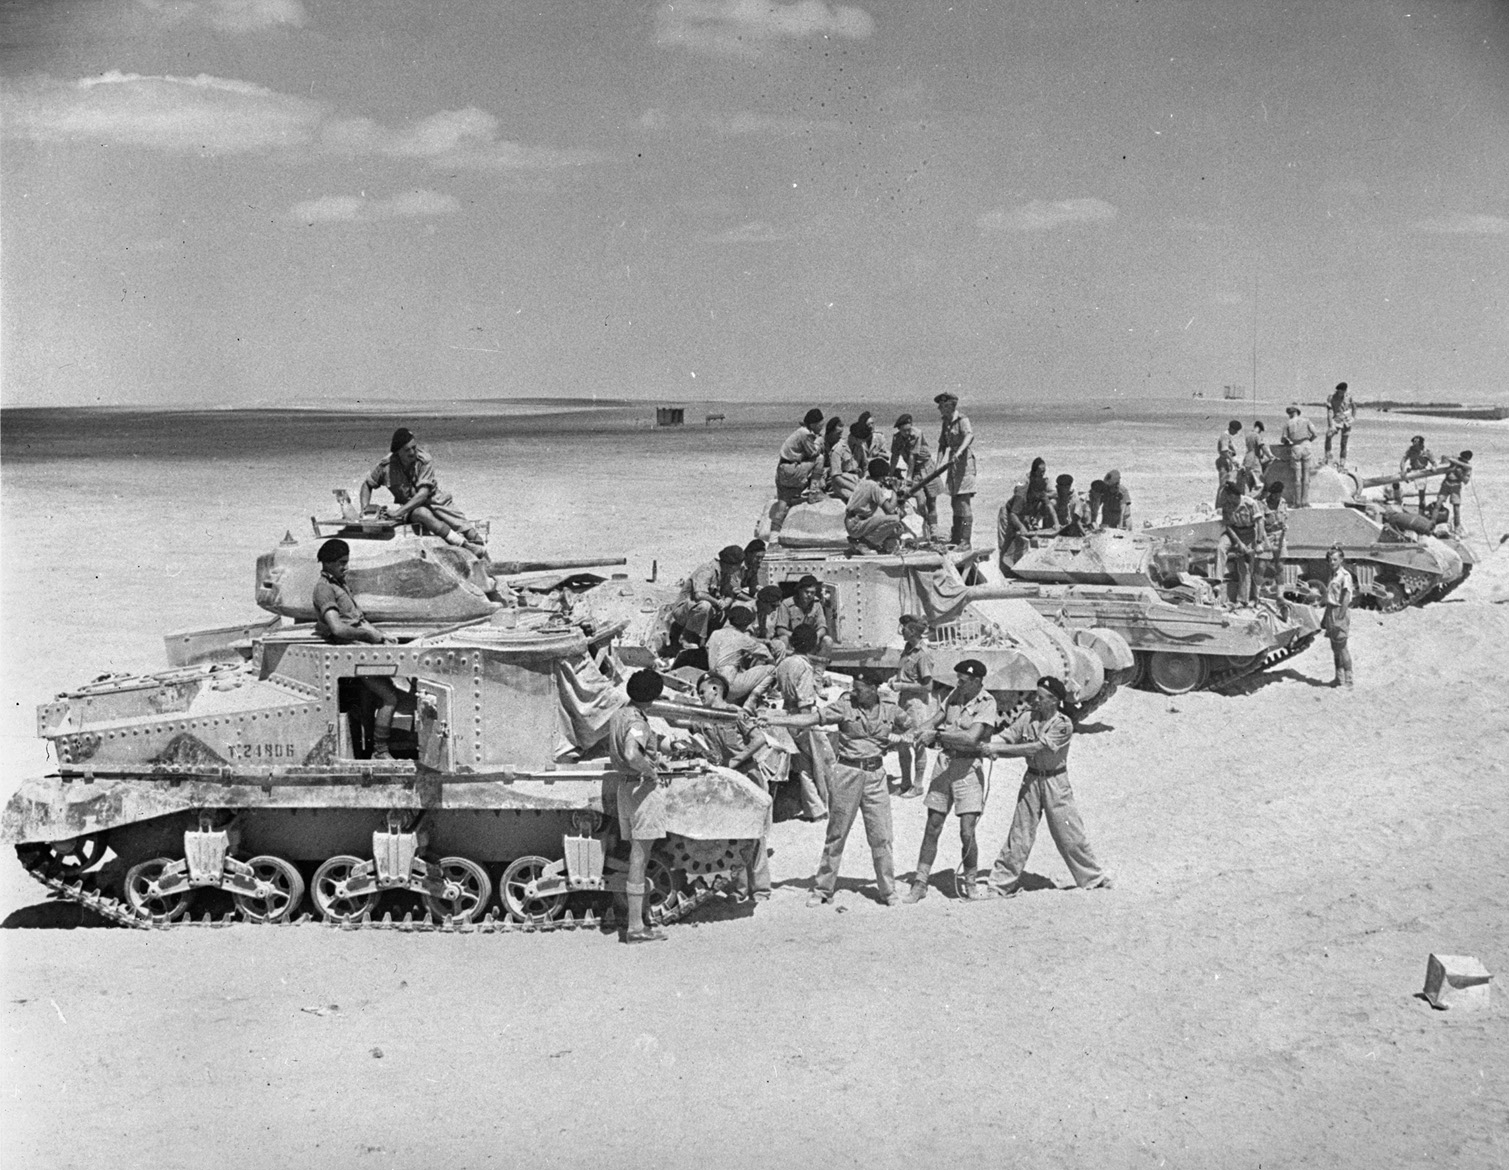 While waiting anxiously for a further combat role, troops of the 6th South African Armoured Division train in the Middle East sands with Grant, Crusader, and Sherman tanks. 